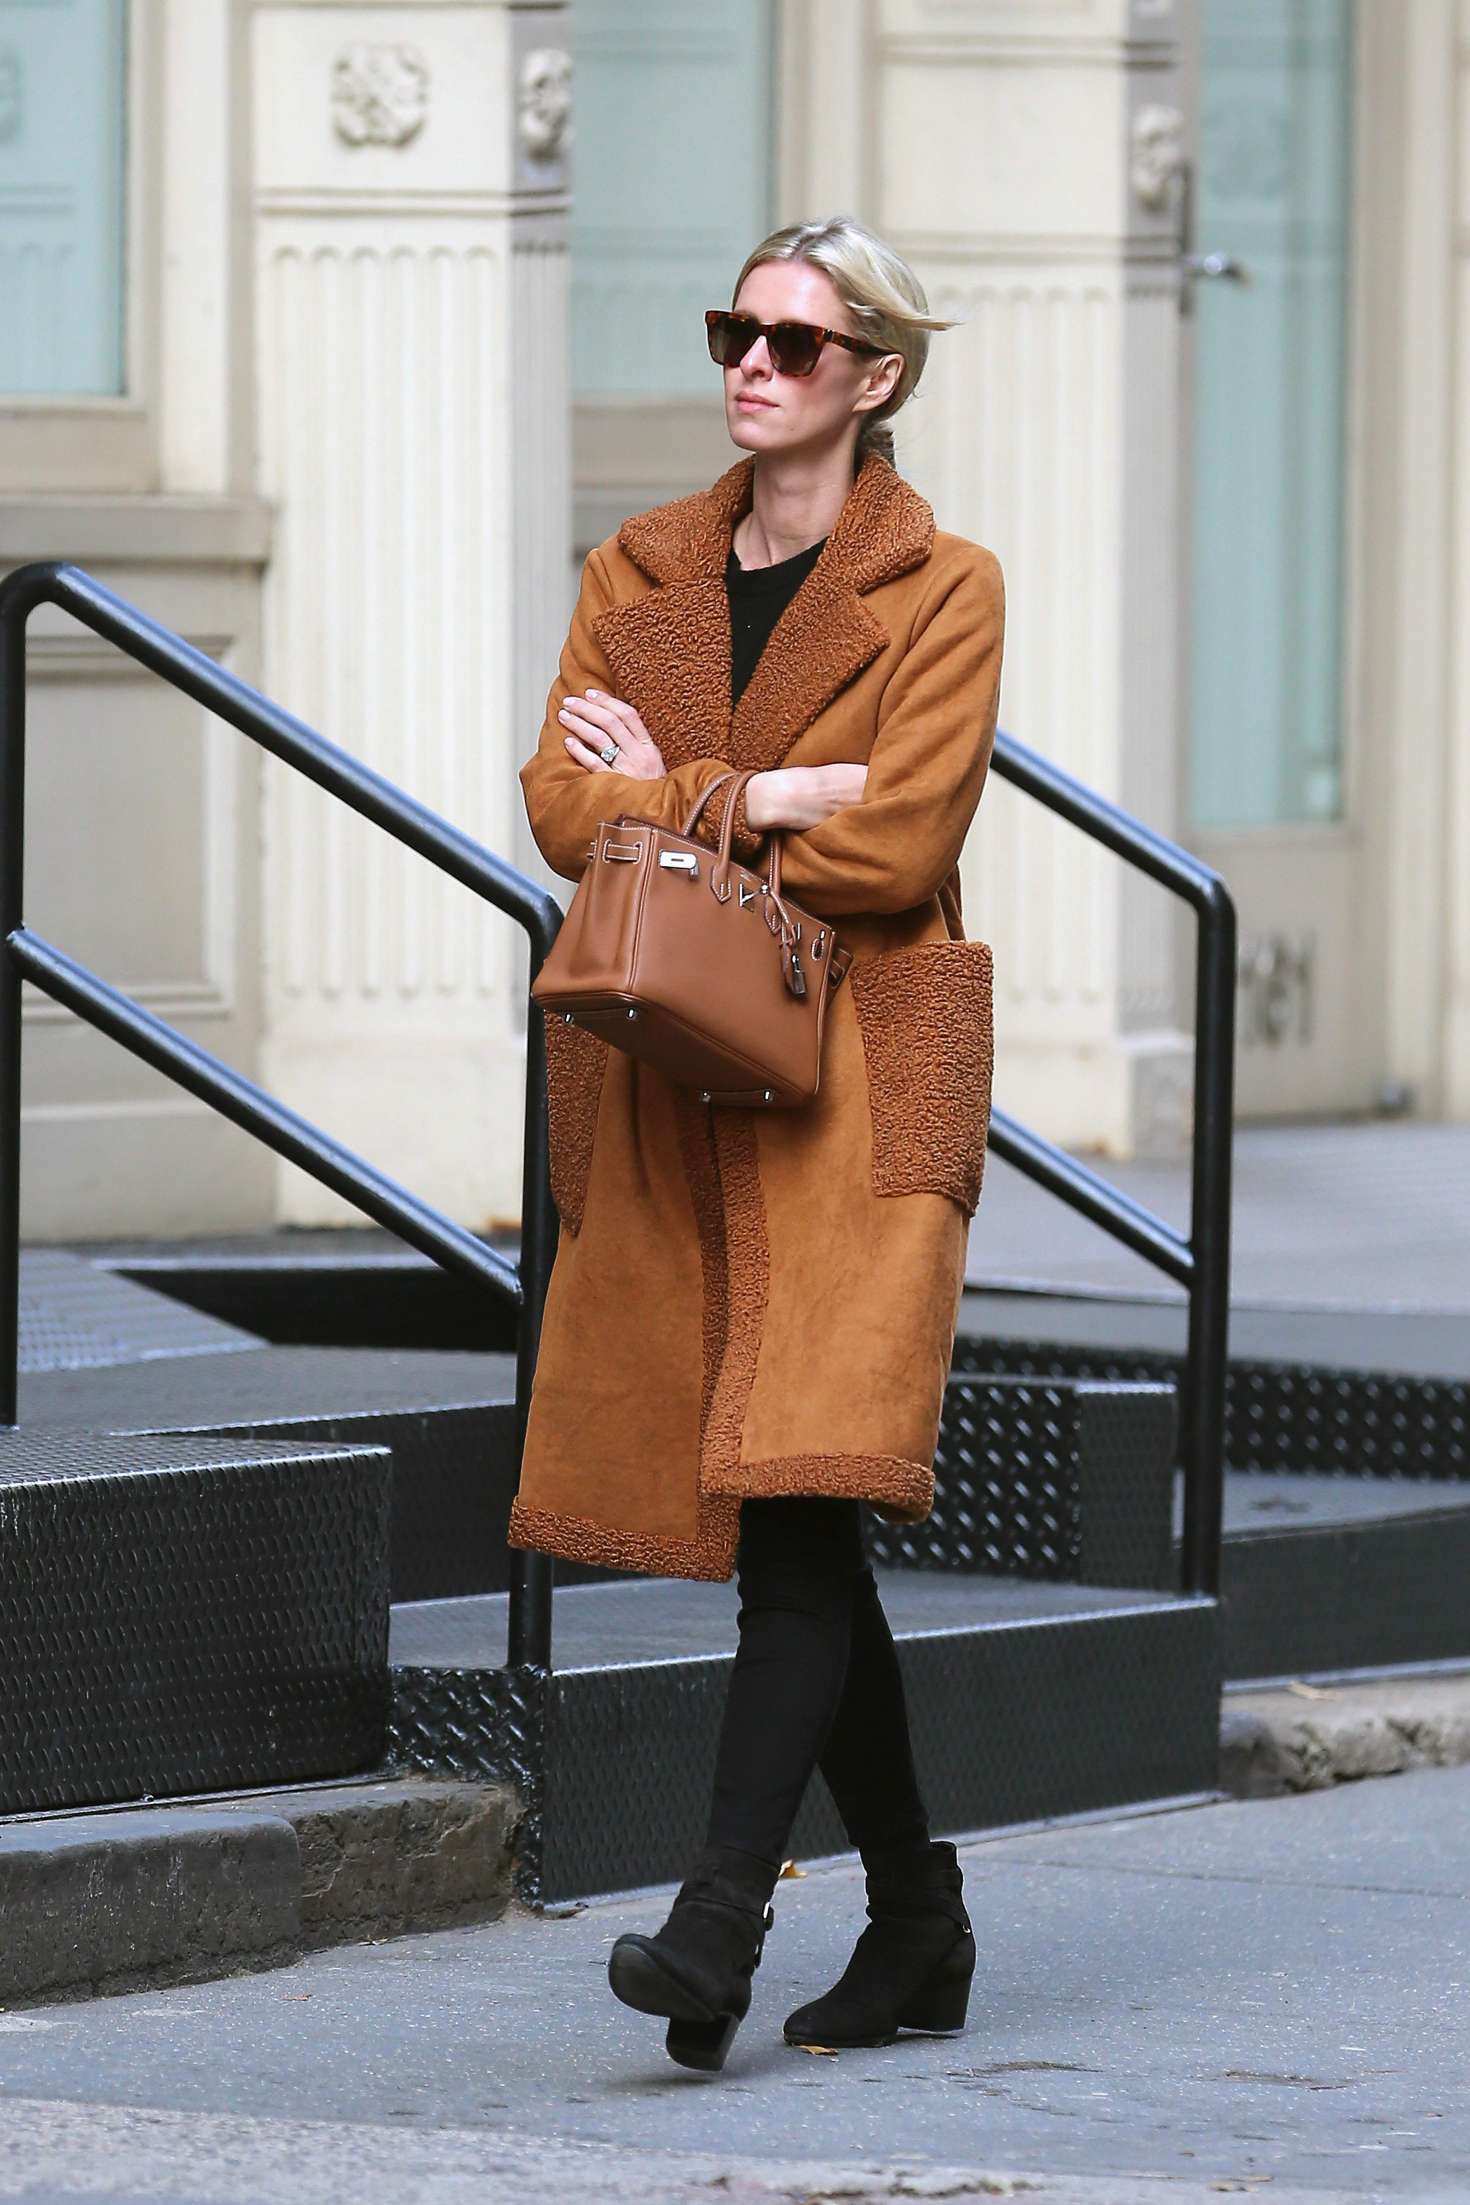 Nicky Hilton - Out and about in New York City